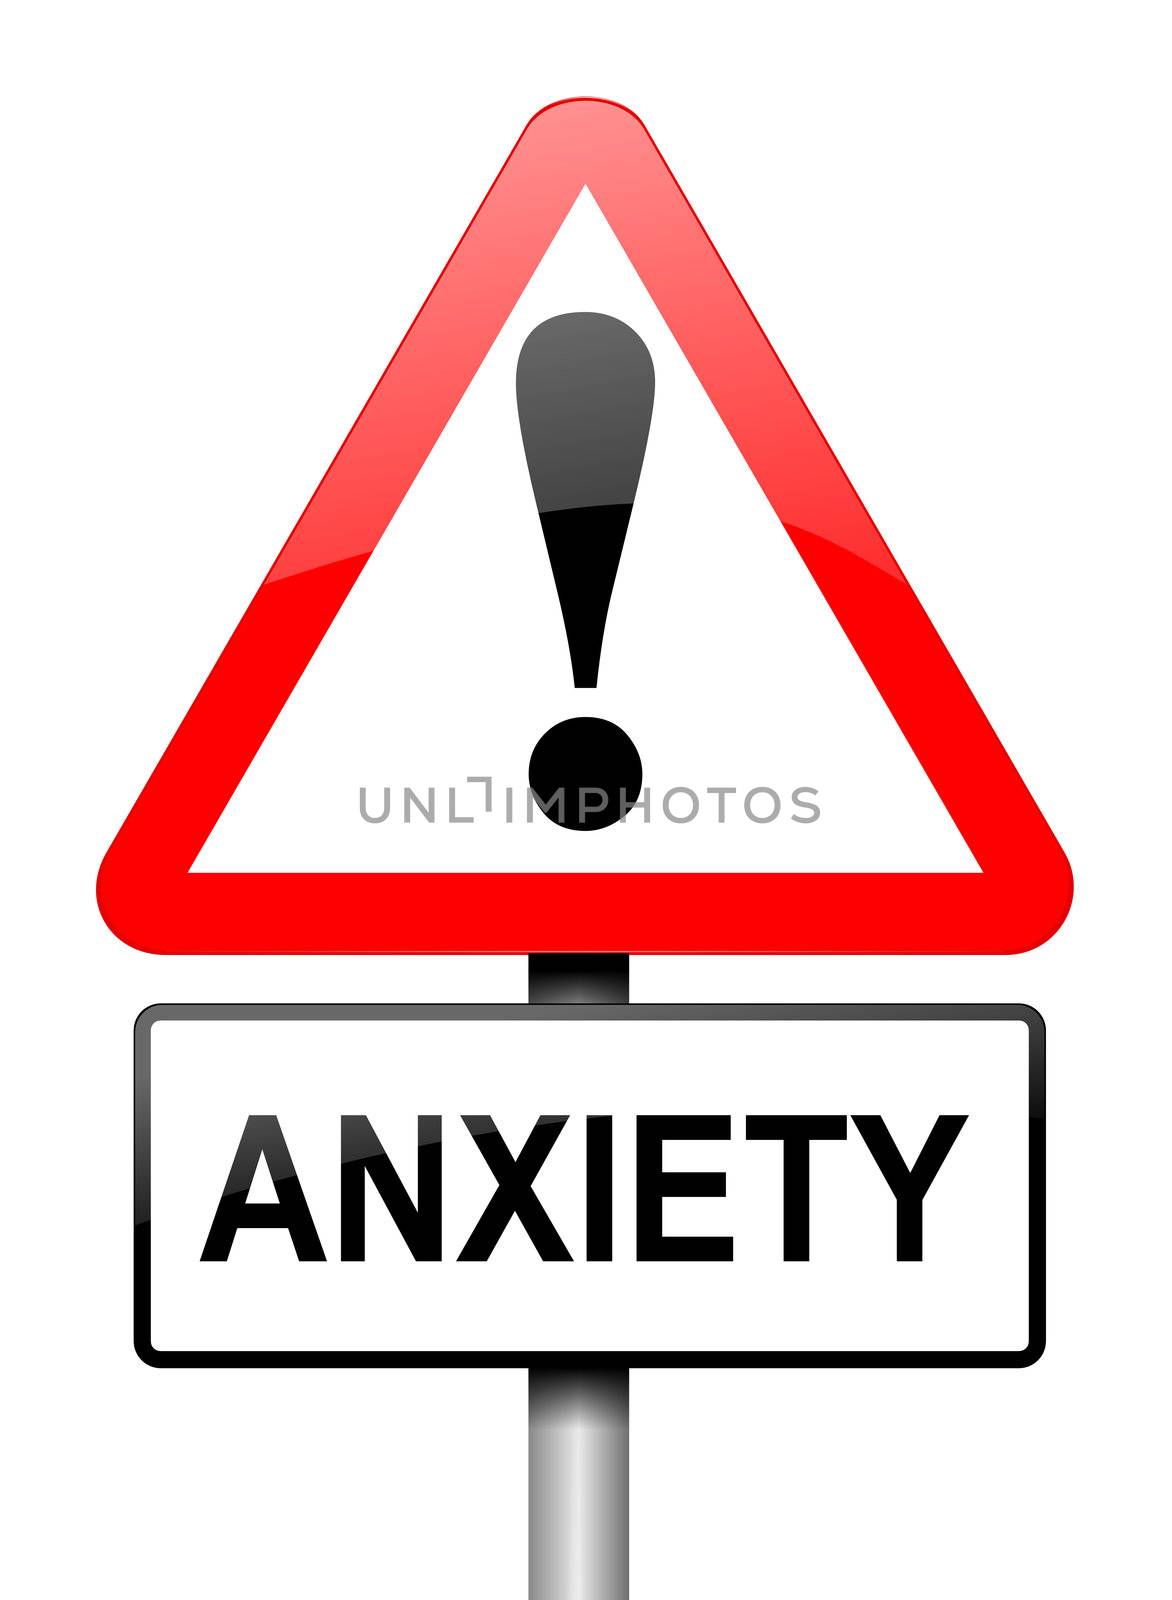 Anxiety warning. by 72soul